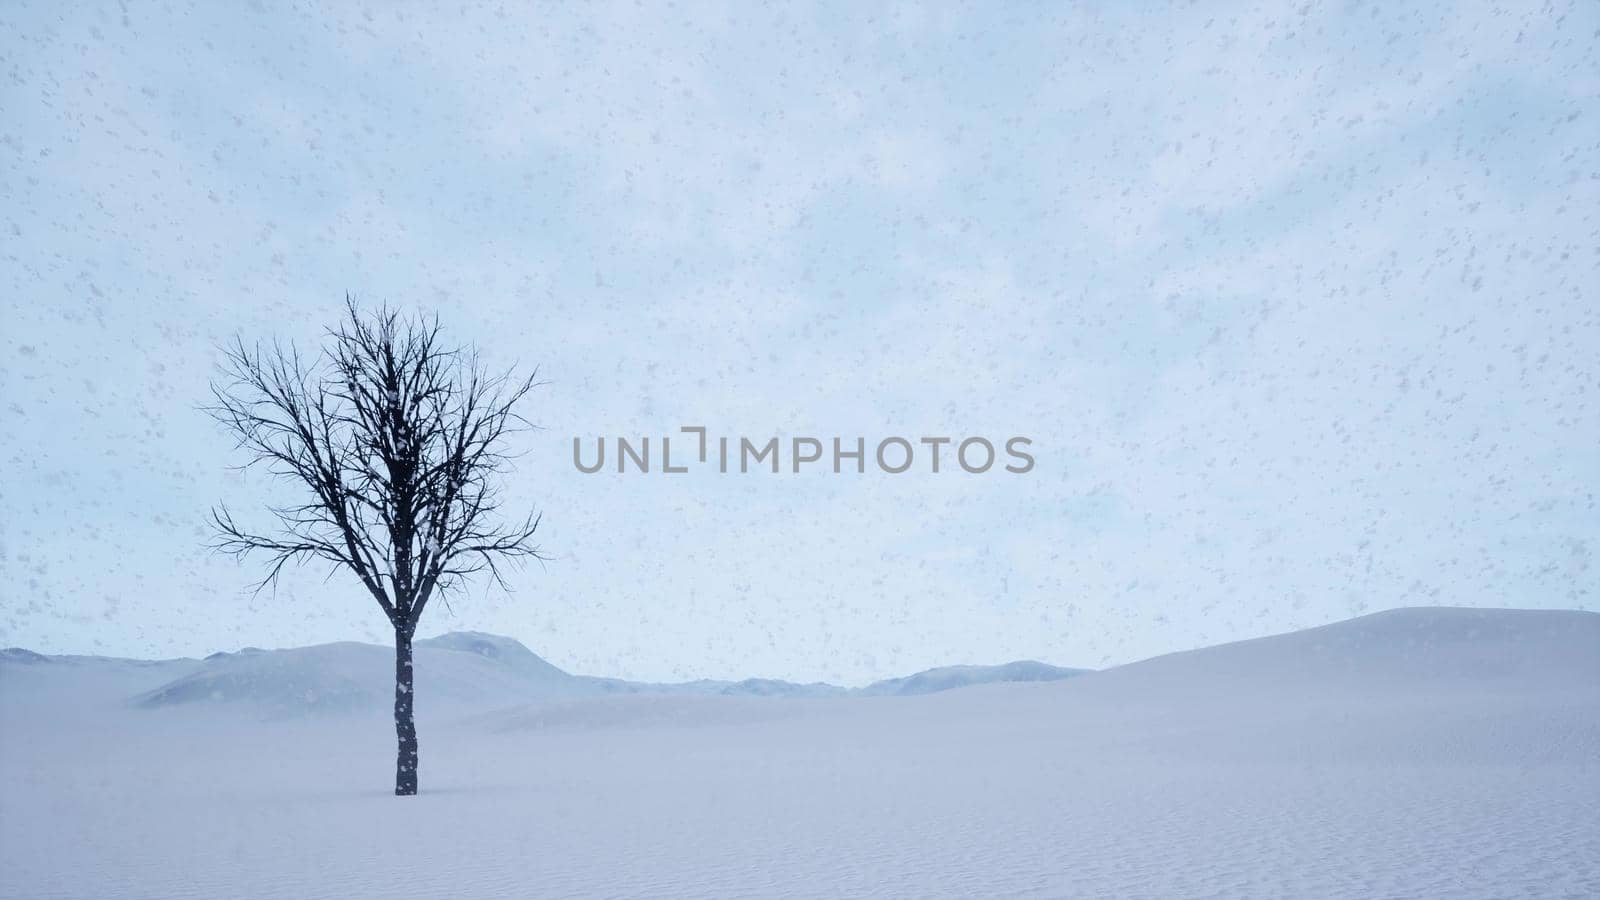 Snow is falling in realistic 3d style Dramatic sky landscape one tree 3d render by Zozulinskyi